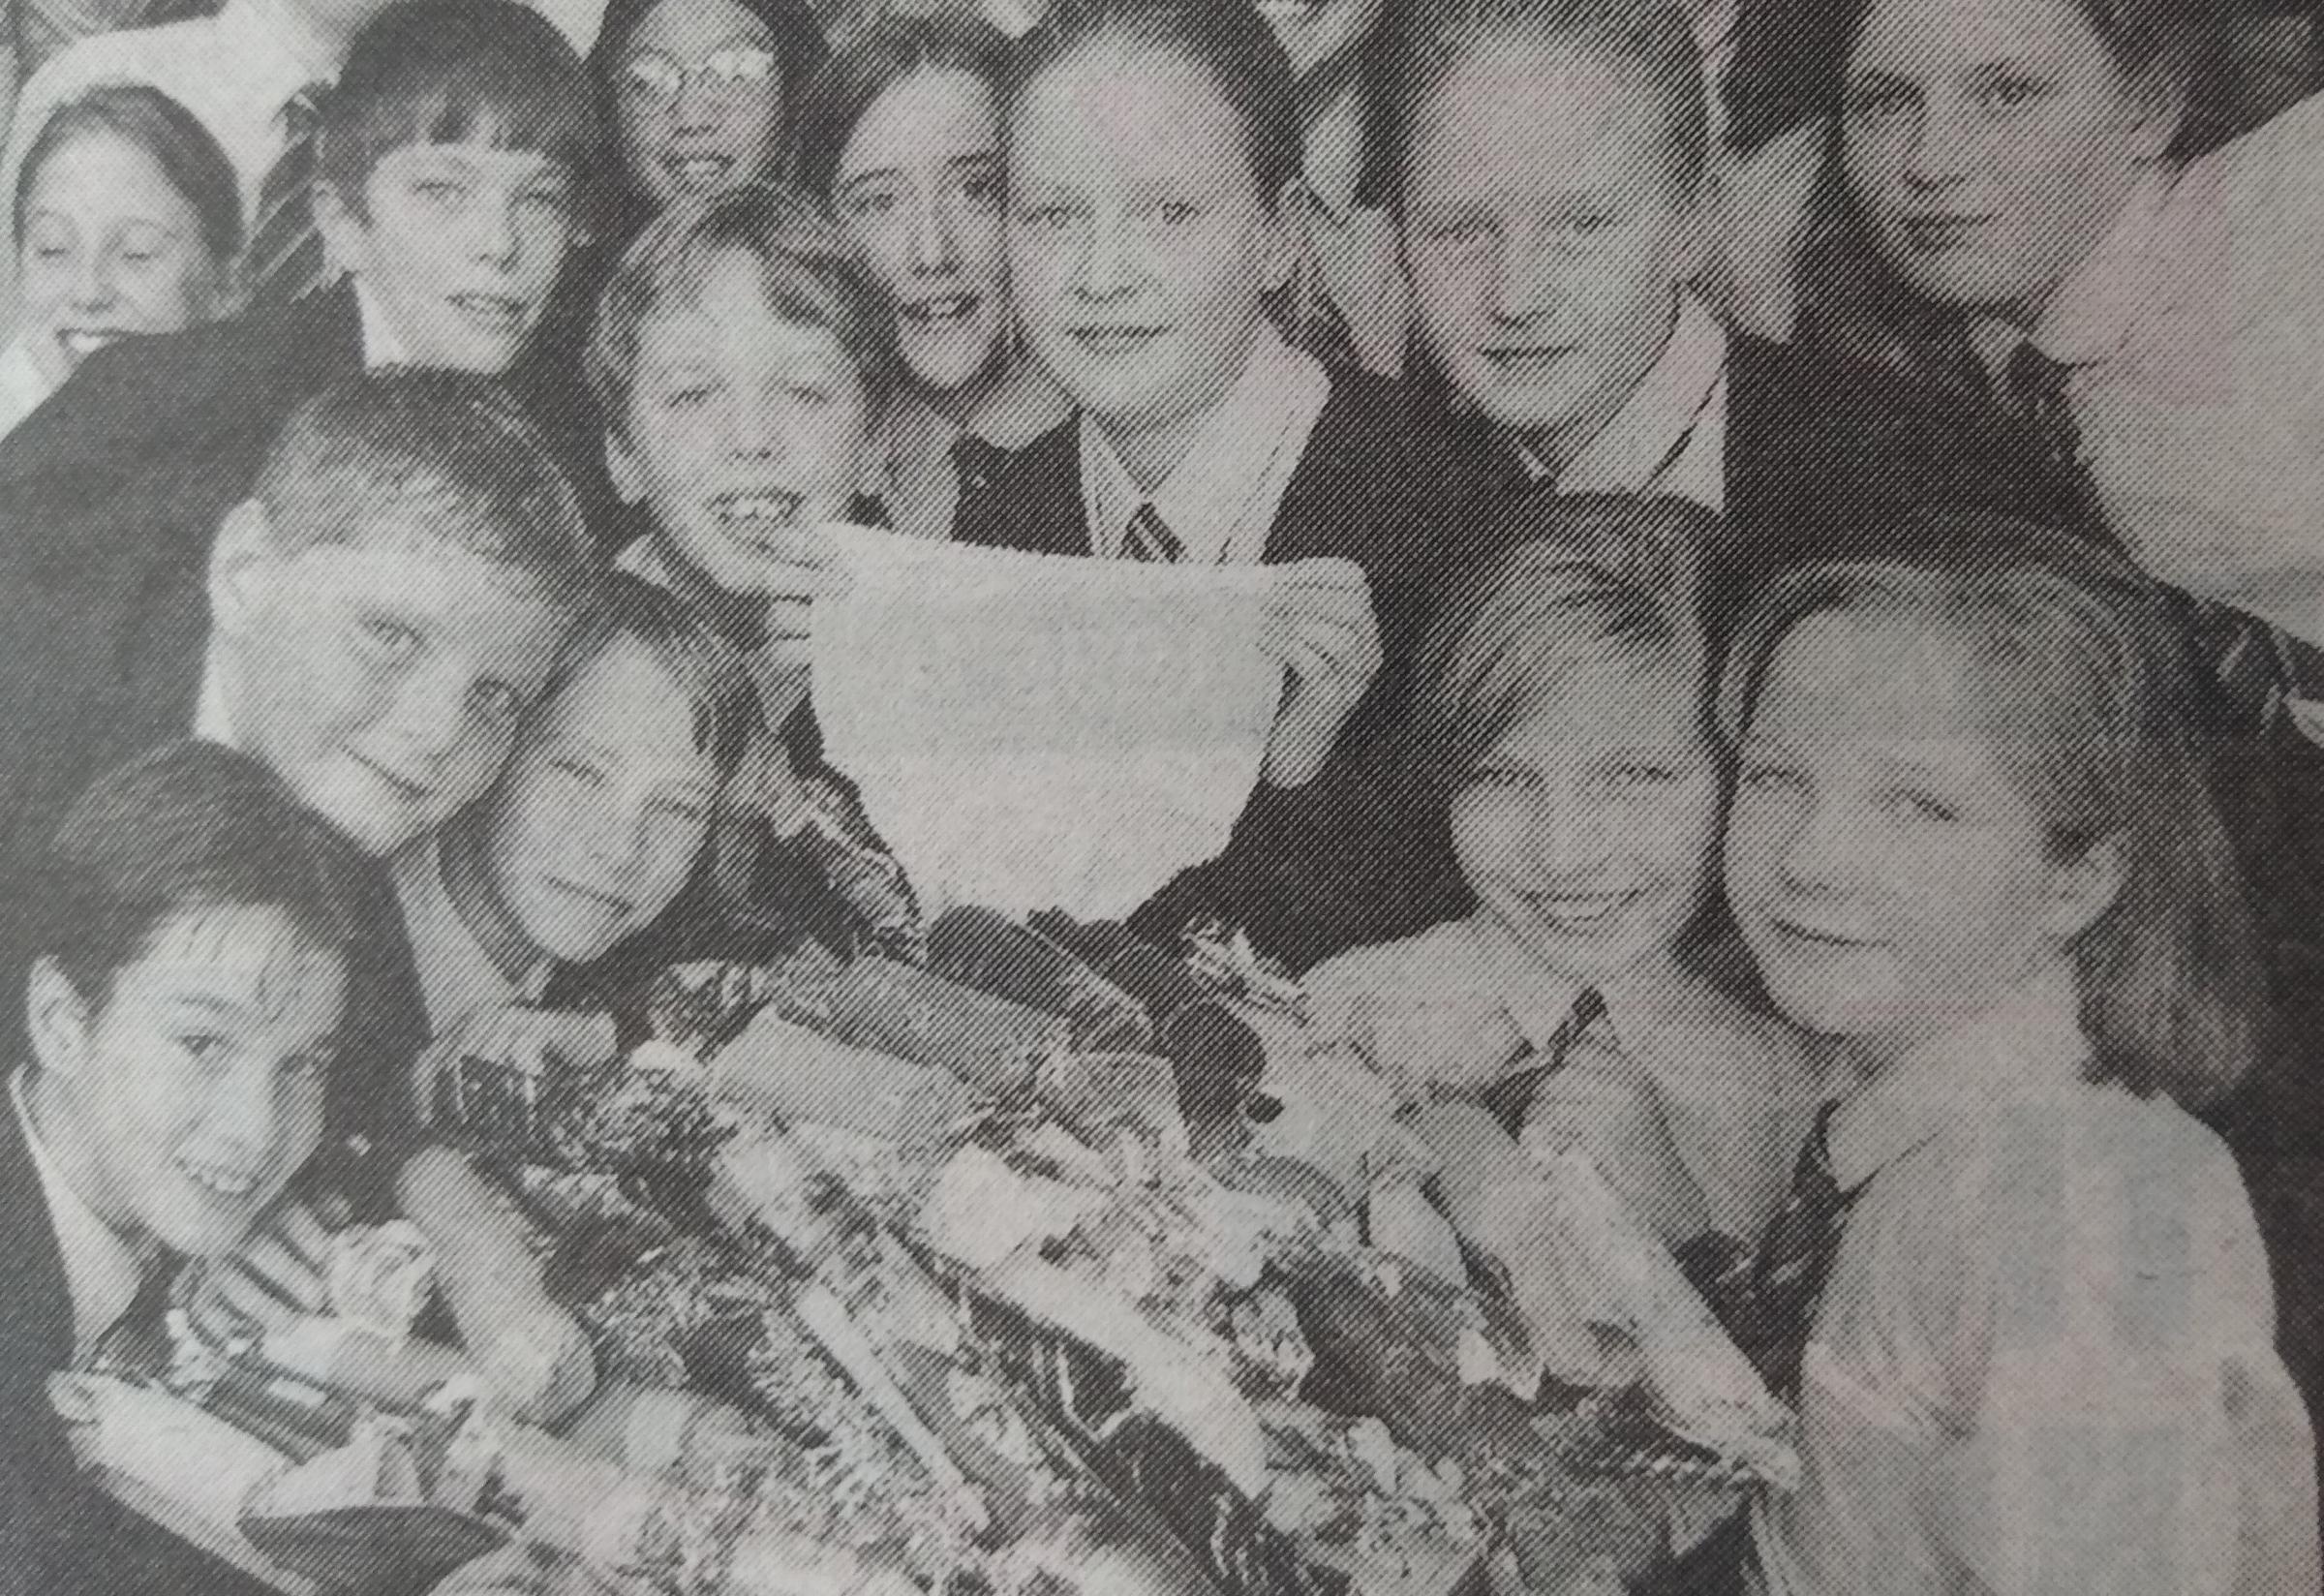 October 1995 and pupils were stuffing hundreds of pairs of underwear in Christmas crackers to be sent to war-torn Bosnia, after an aid worker told the youngsters that was one of the things that was needed most in refugee camps